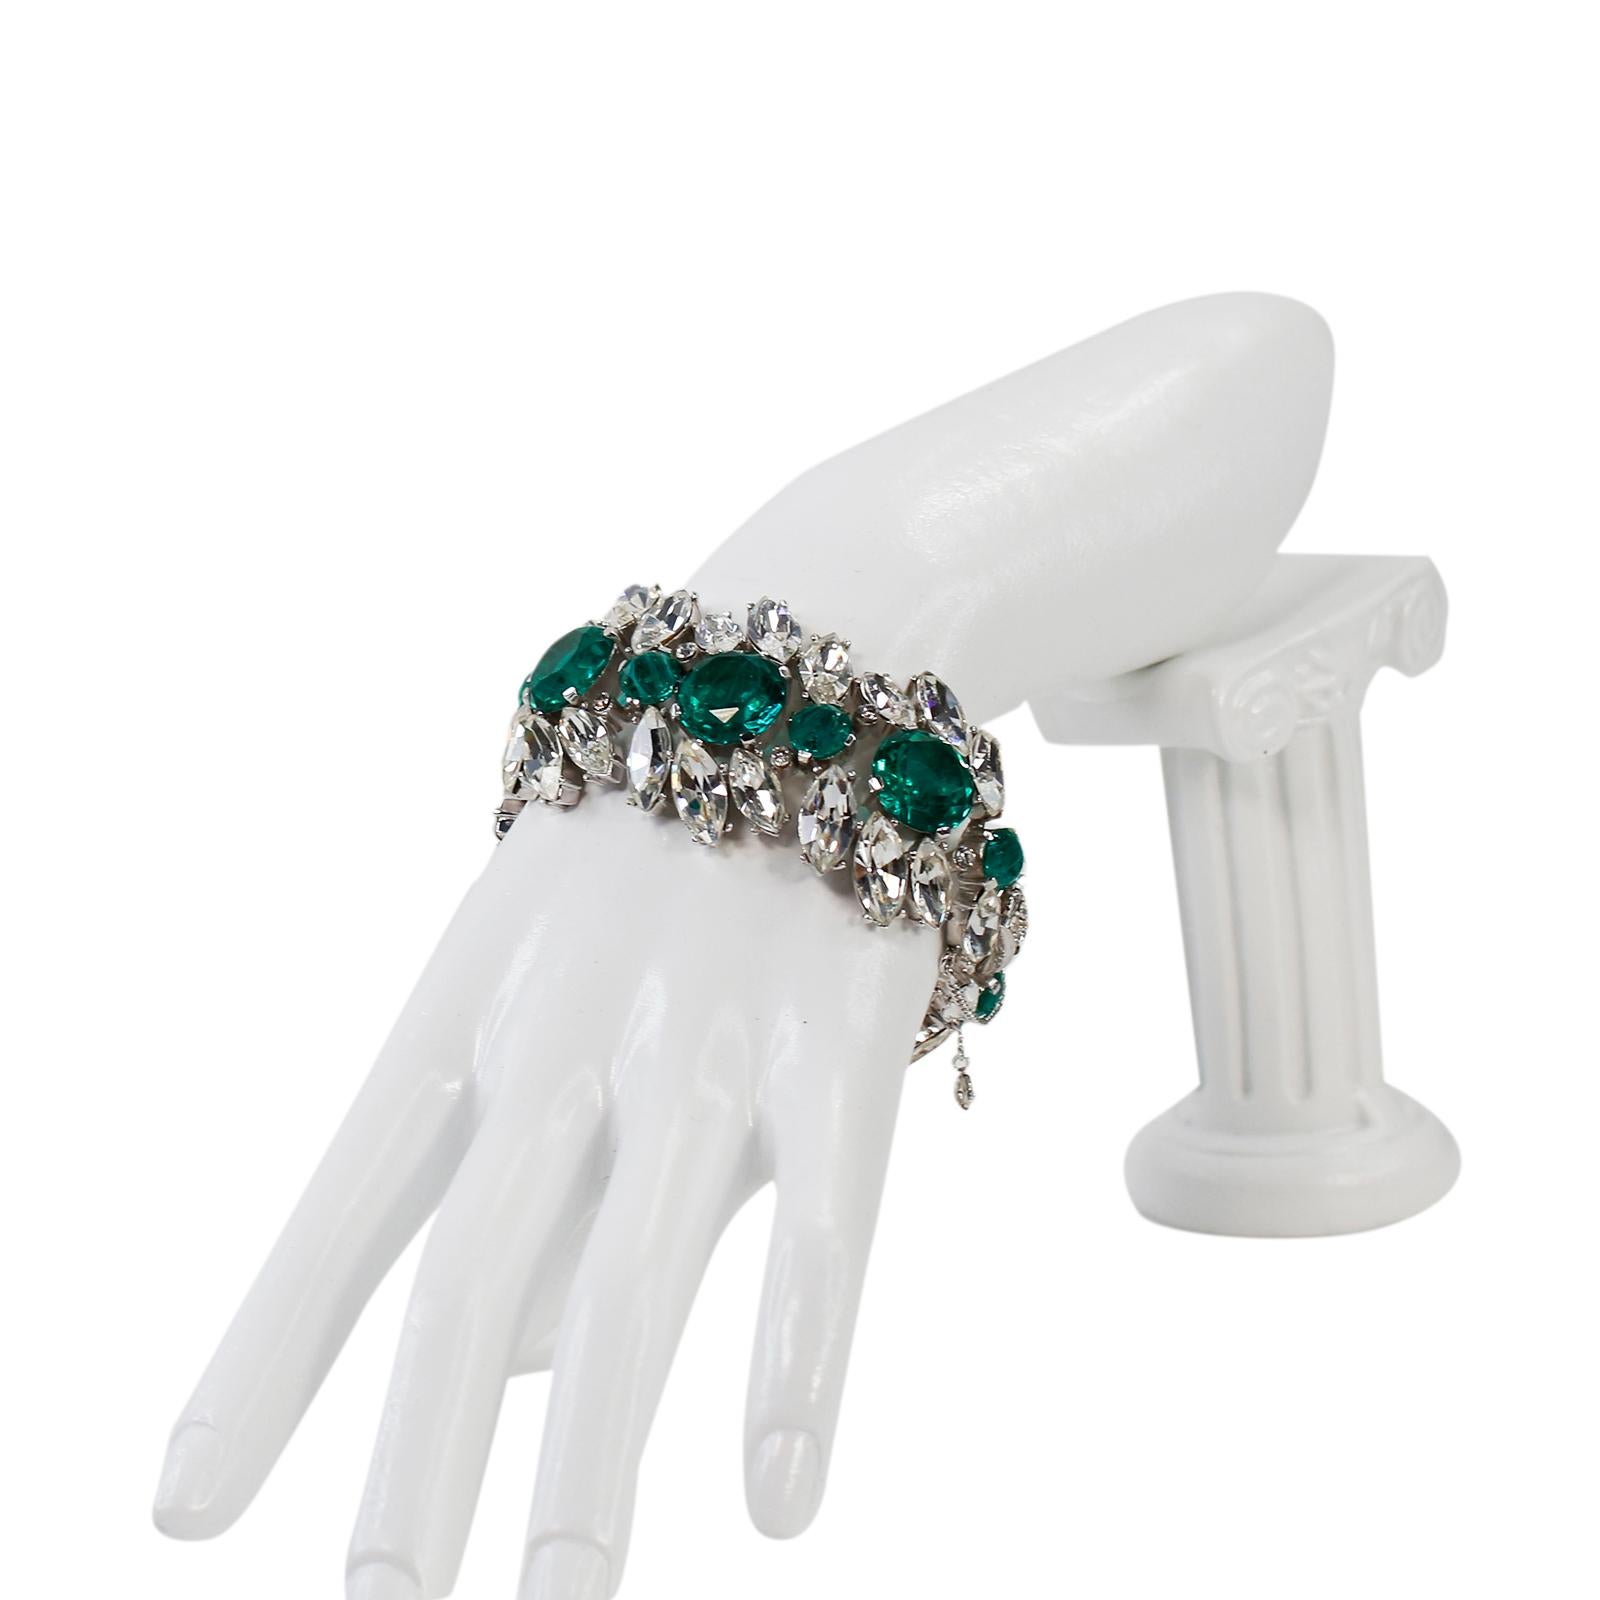 Vintage Trifari Emerald Green and Crystal Bracelet Circa 1960s For Sale 3